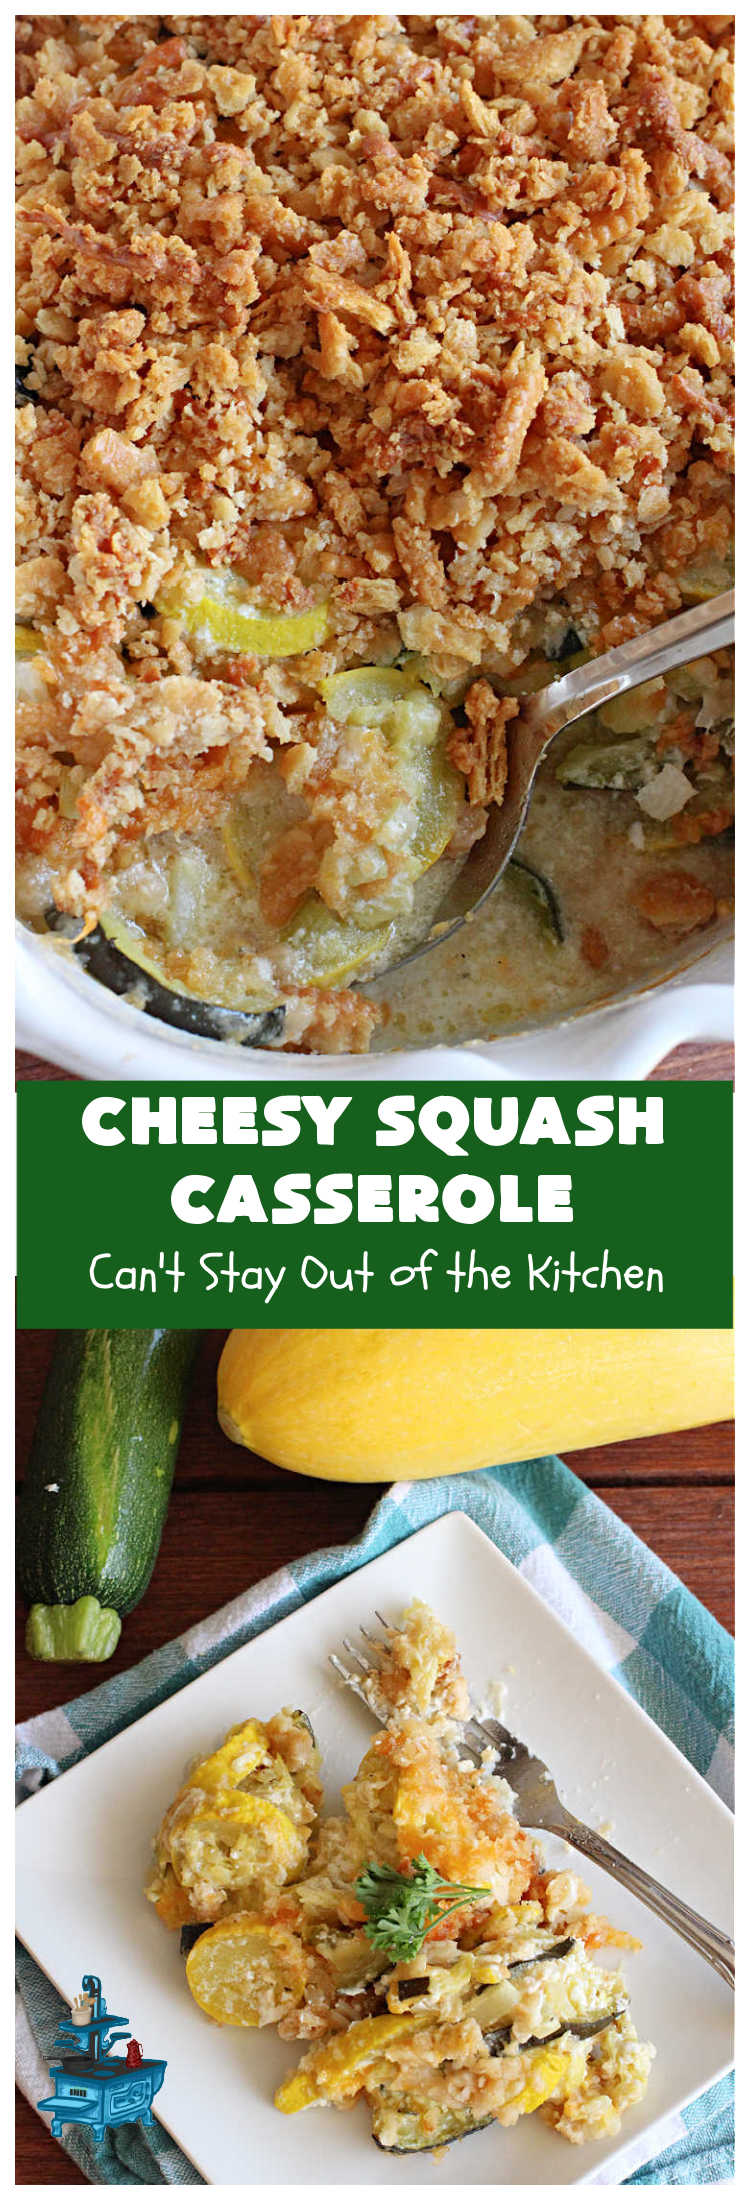 Cheesy Squash Casserole | Can't Stay Out of the Kitchen | this fantastic #Squash  #SideDish is so delightful & easy to whip up you'll want to make it frequently. It's terrific for company or #holiday dinners like #Thanksgiving or #Christmas. The #RitzCracker topping makes everything irresistible. #CheddarCheese #Zucchini #YellowSquash #casserole #CheesySquashCasserole